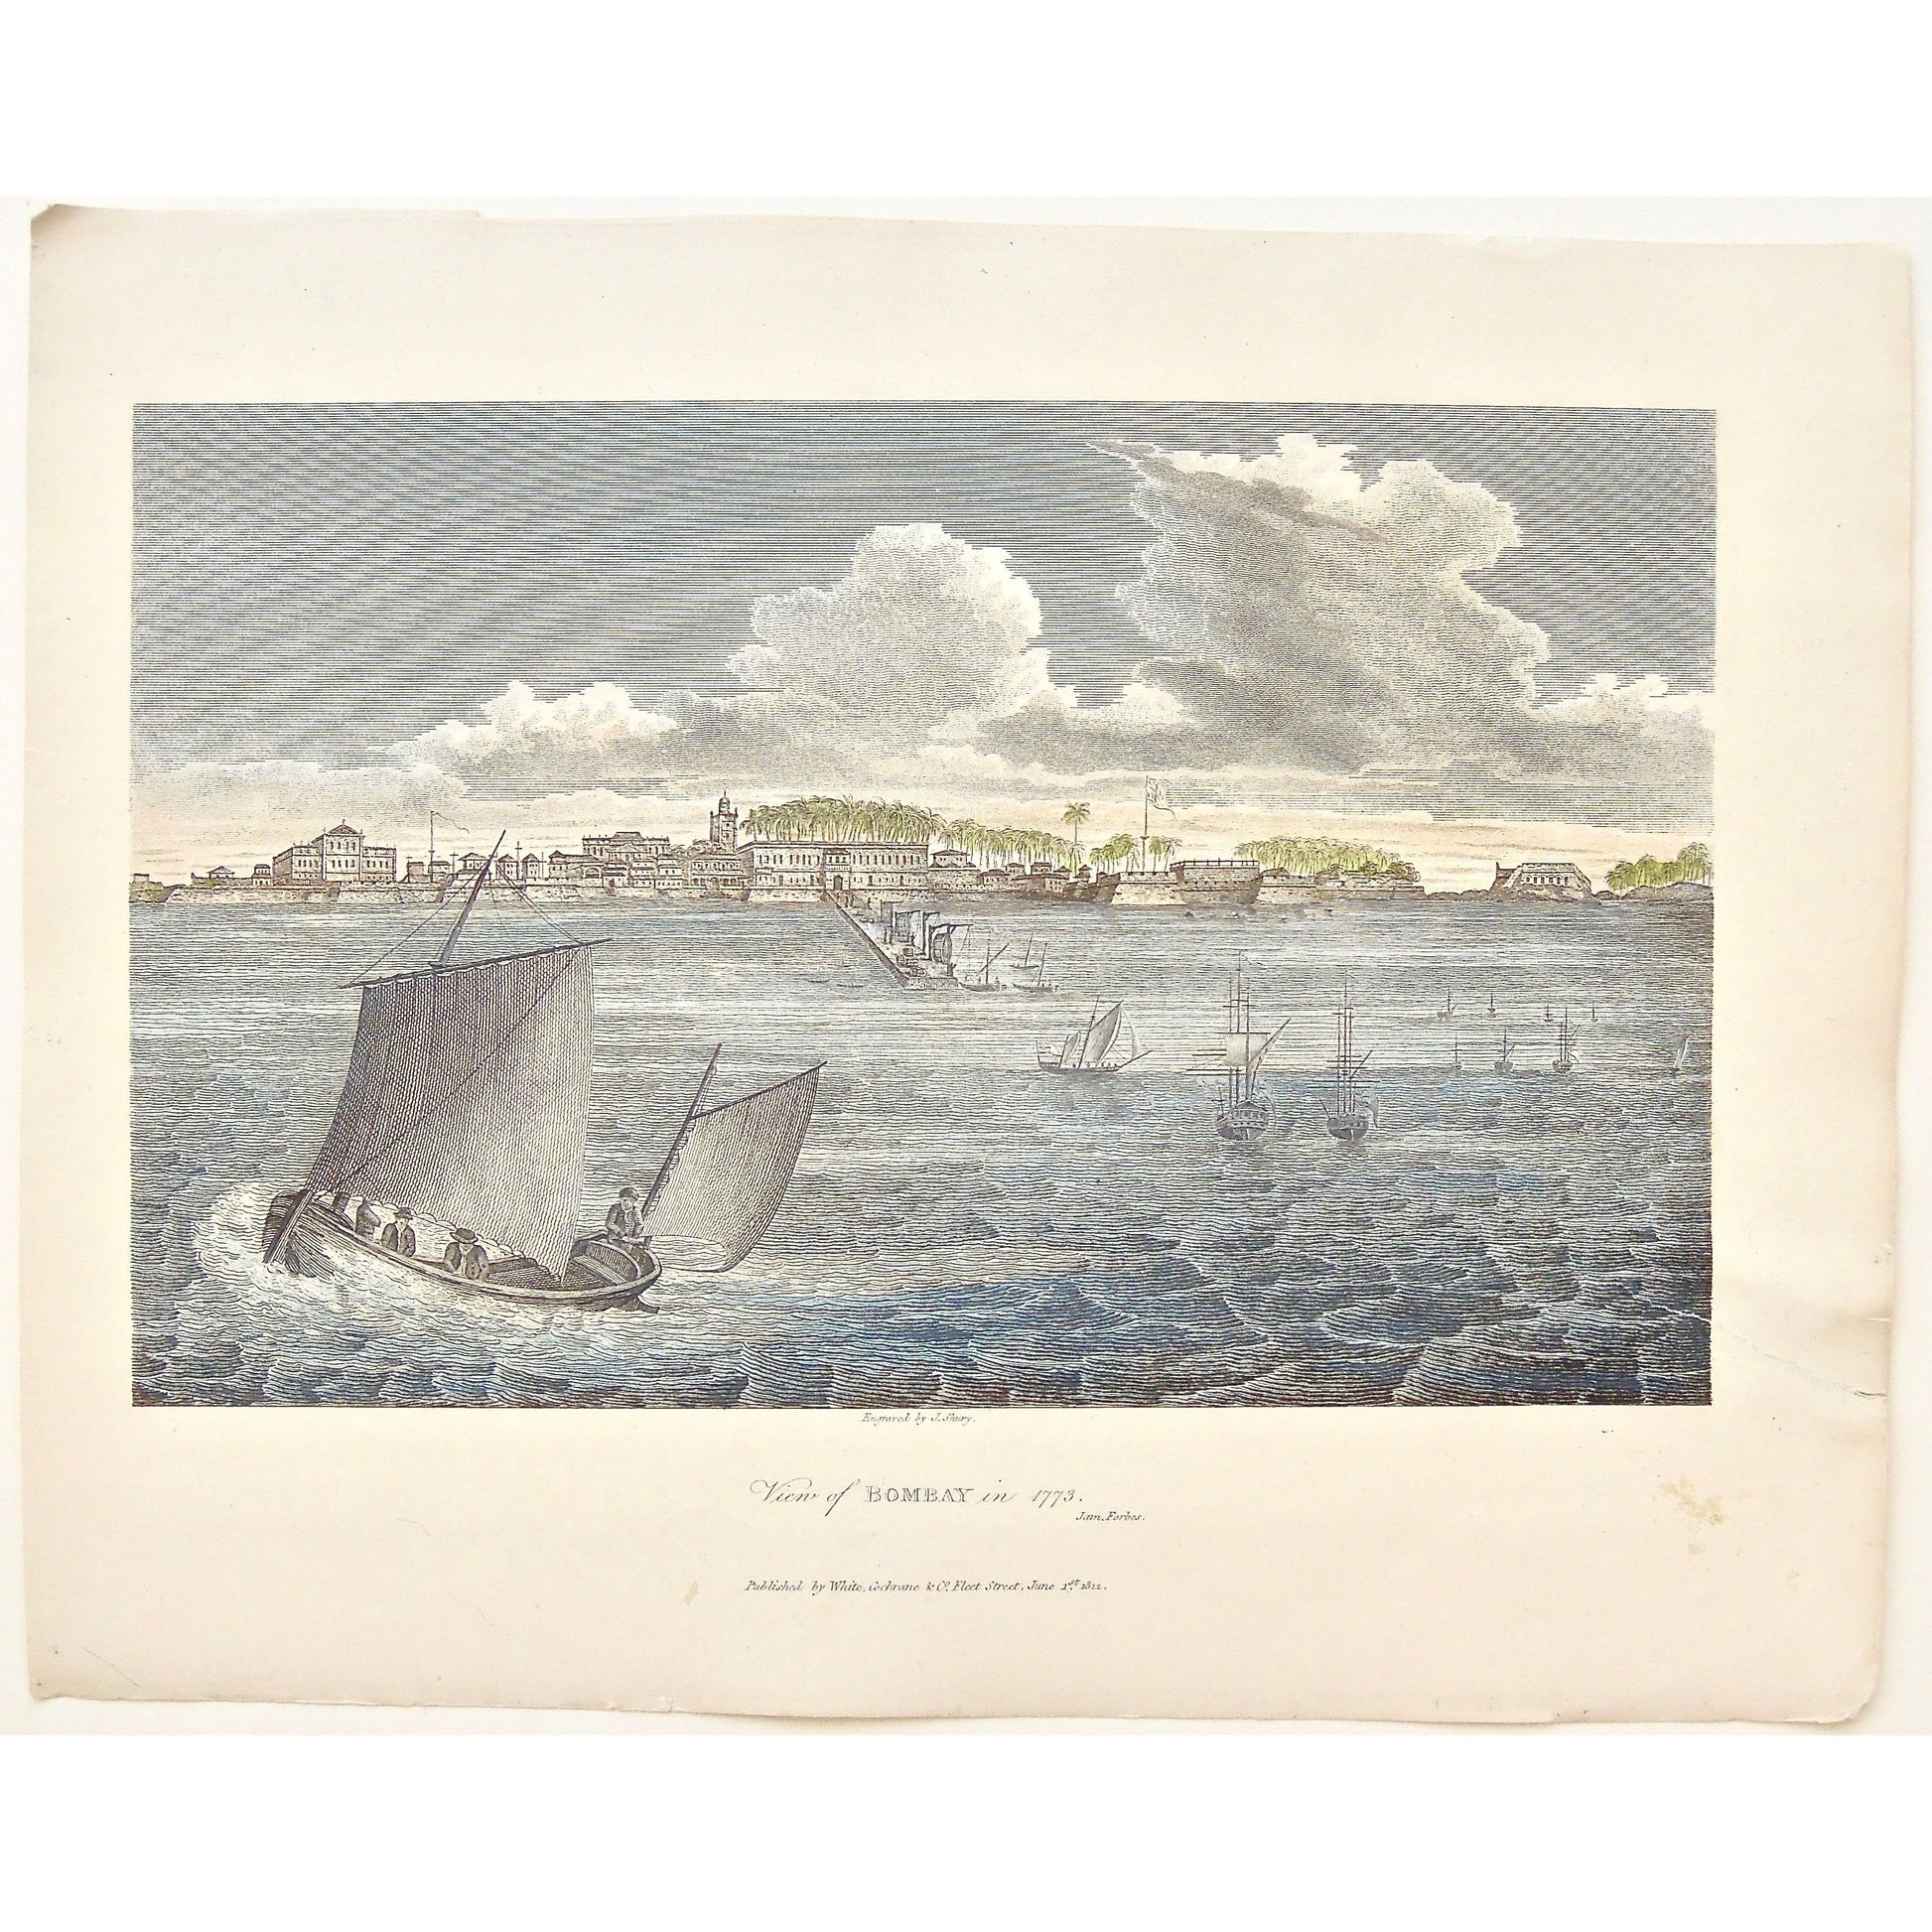 Bombay, 1773, View of Bombay, Bombay from the water, boats, sailing, sailboats, Ships, Coastal town, on the water, India, James Forbes, Forbes, Oriental Memoirs, Oriental, Memoirs, Seventeen Years Residence in India, White, Cochrane & Co., Horace’s Head, Fleet Street, London, 1812, 1813, Shury, Bensley, Bolt Court, Antique Print, Antique, Prints, Vintage Prints, Vintage, Collector, Collectable, Original, Unique, Rare Map, Rare, Rare books, engravings, engraving, steel engraving, art history, history, histor